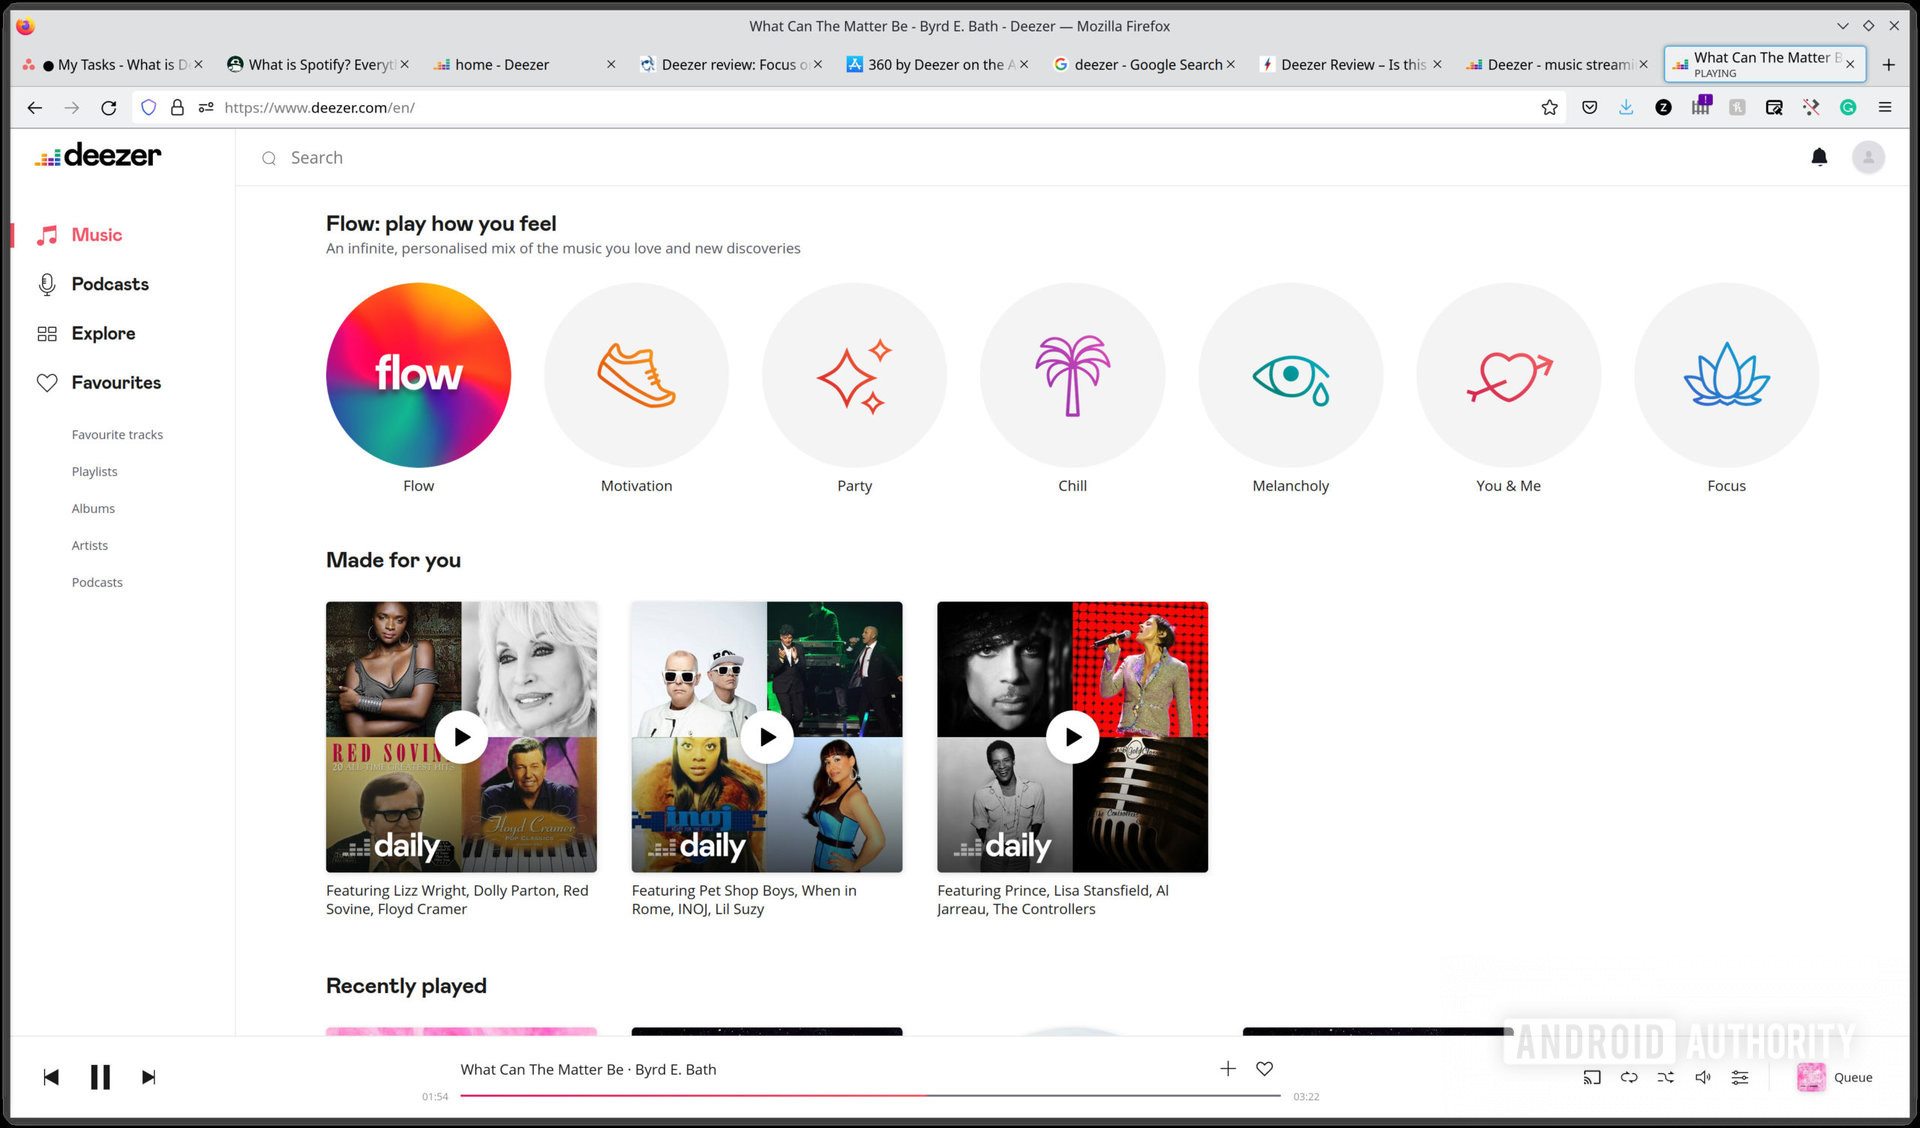 The Deezer home page with "Flow"  clearly visible and several genres and albums available.